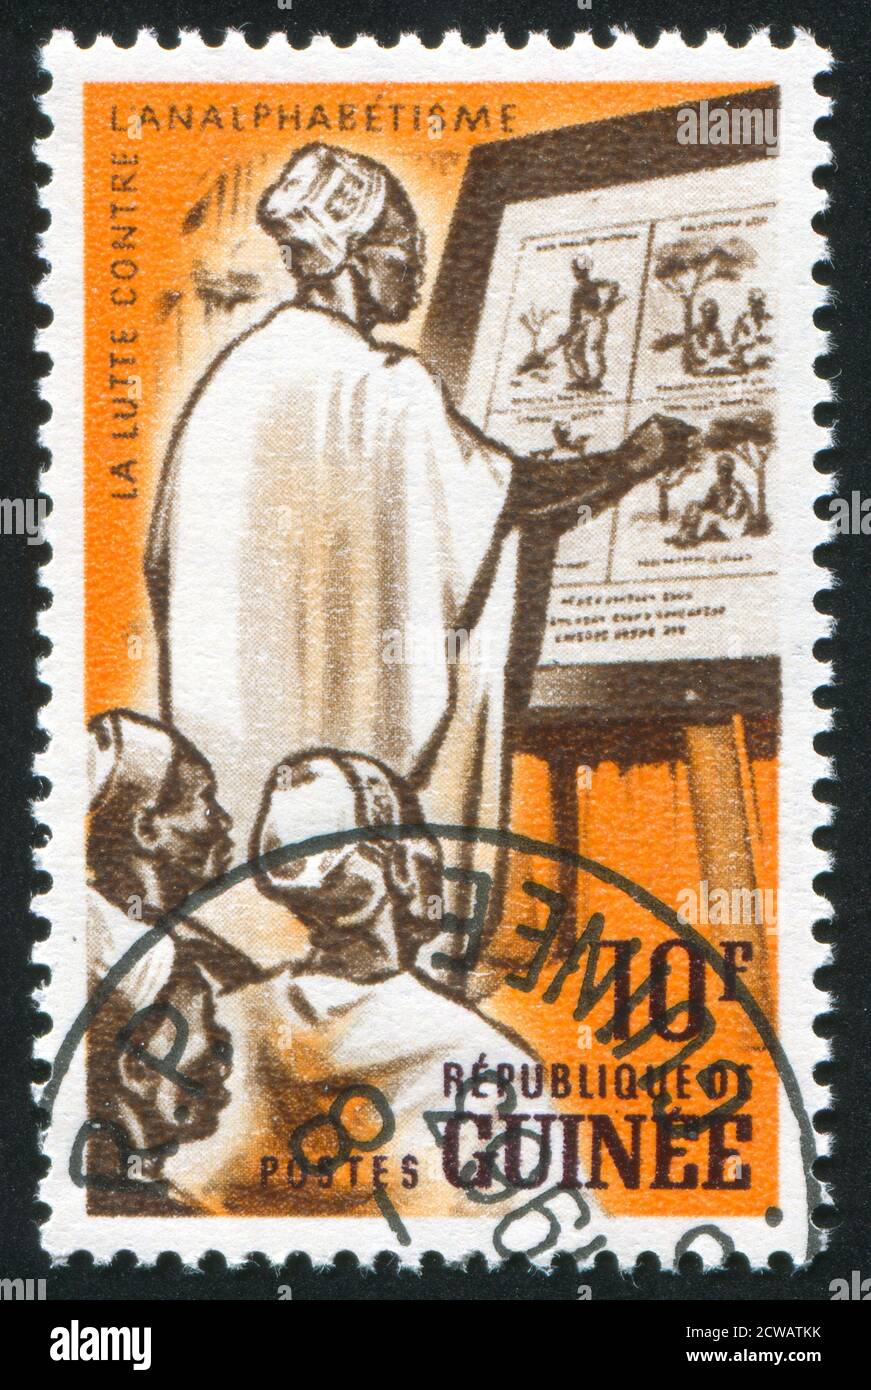 GUINEA CIRCA 1962: stamp printed by Guinea, shows Adult class, circa 1962 Stock Photo